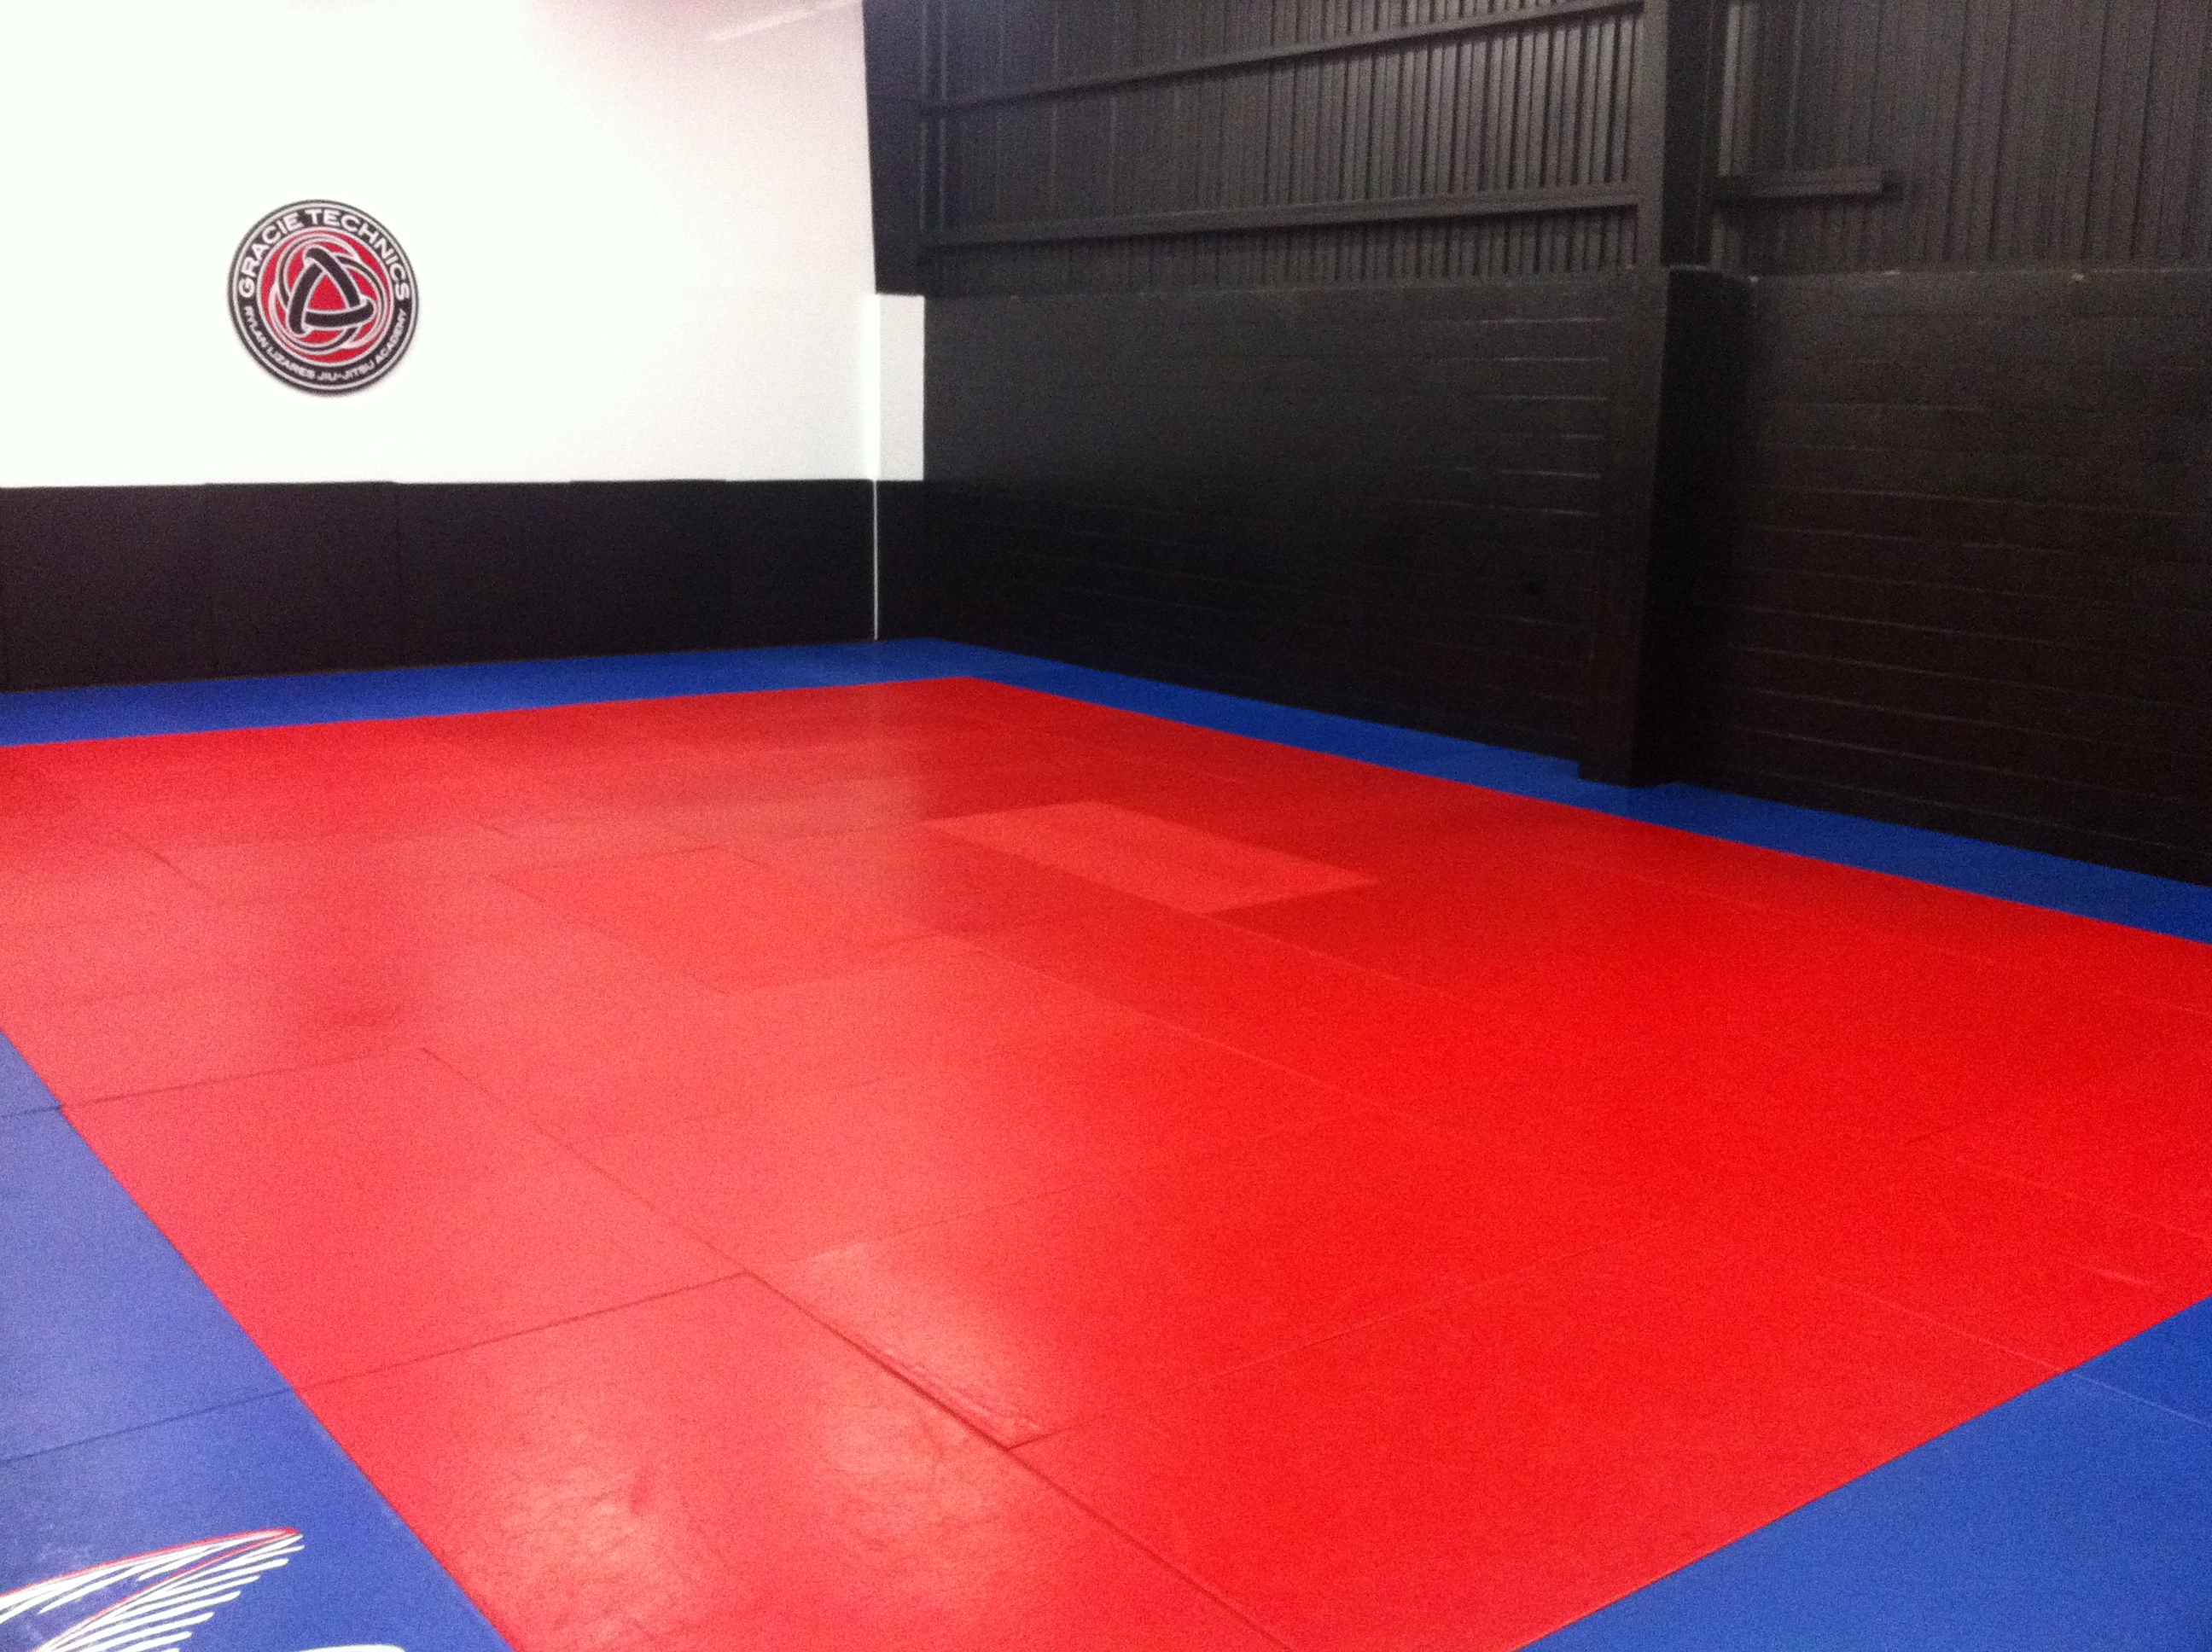 Welcome to the Gracie Technics Academy 2.5!